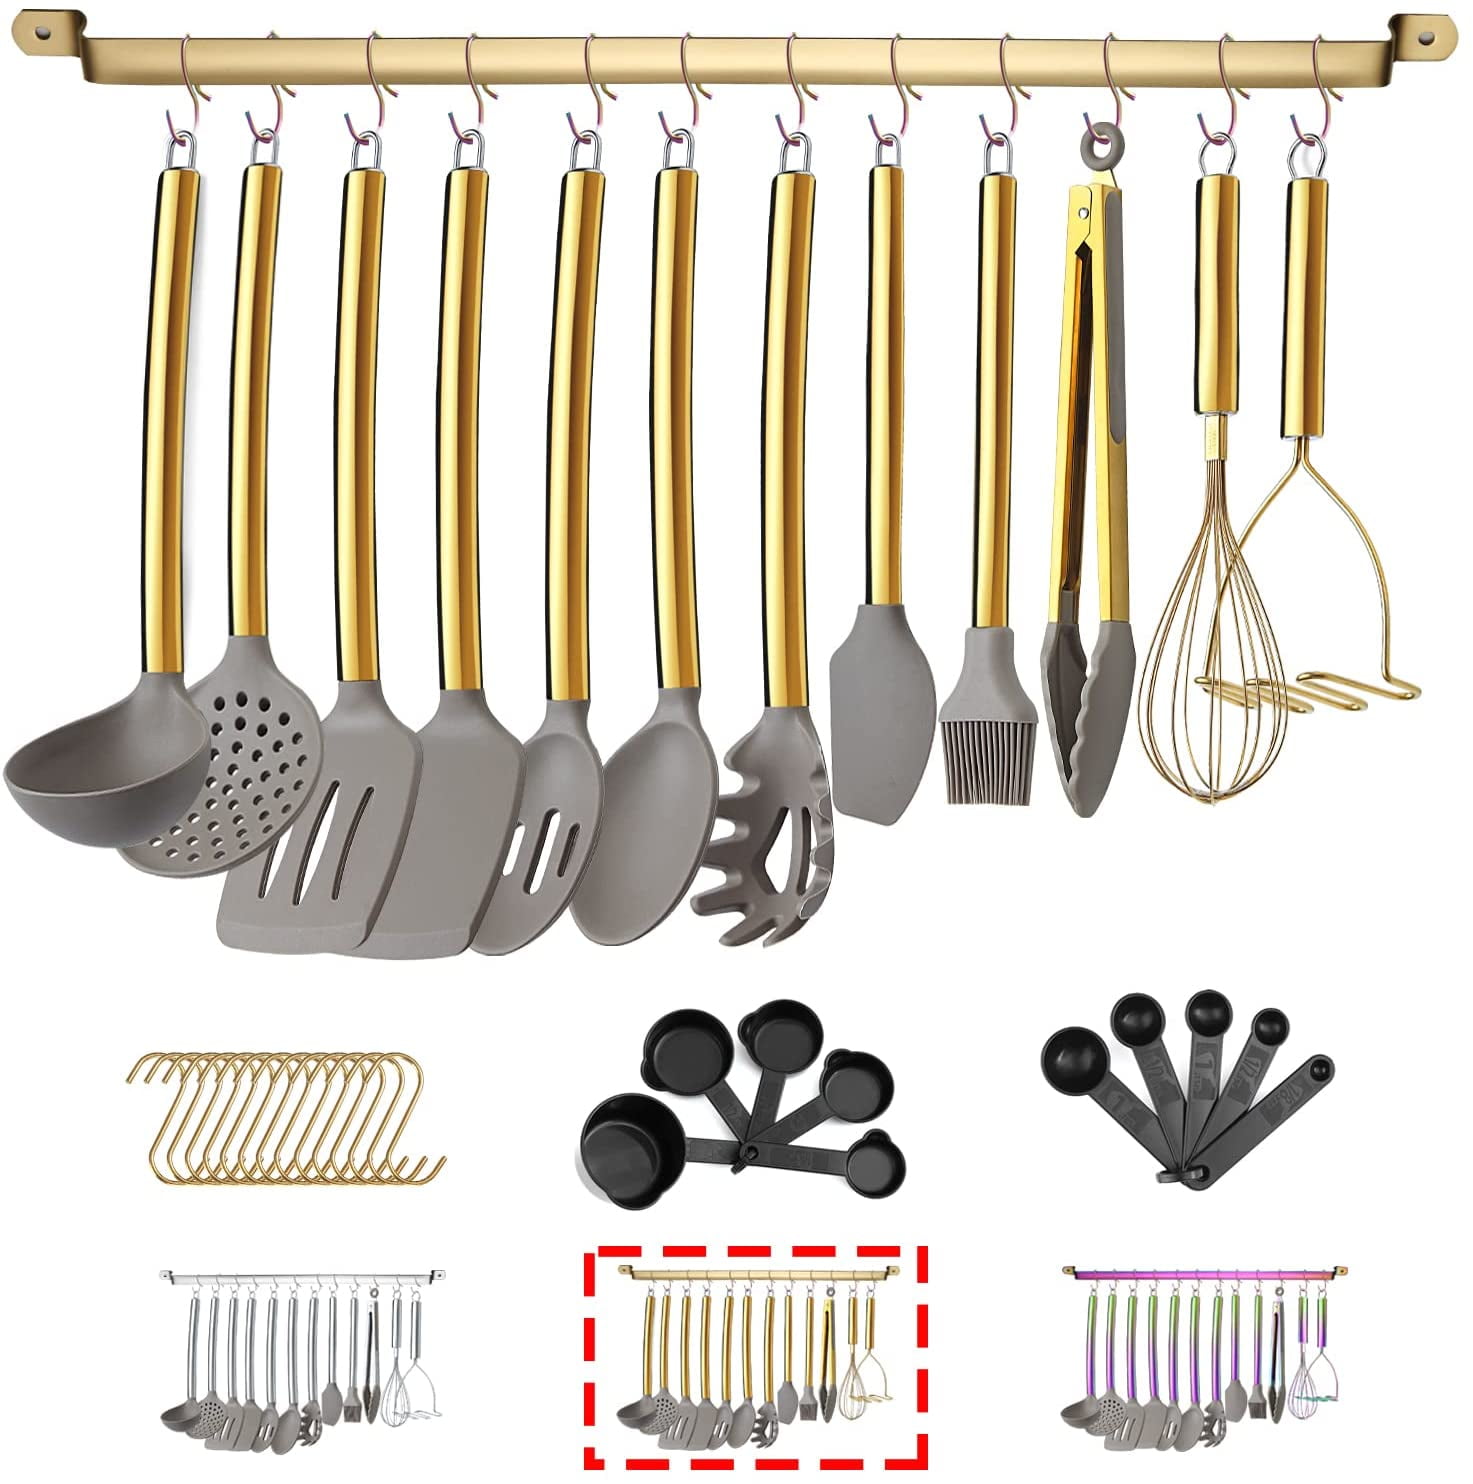 Just Houseware 38 Piece Silicone kitchen Cooking Utensils Set with Utensil  Rack, Silicone Head and Stainless Steel Handle Cookware, Kitchen Tools for  Utensil Sets, Non-Stick kitchen Gadgets (Gold) 